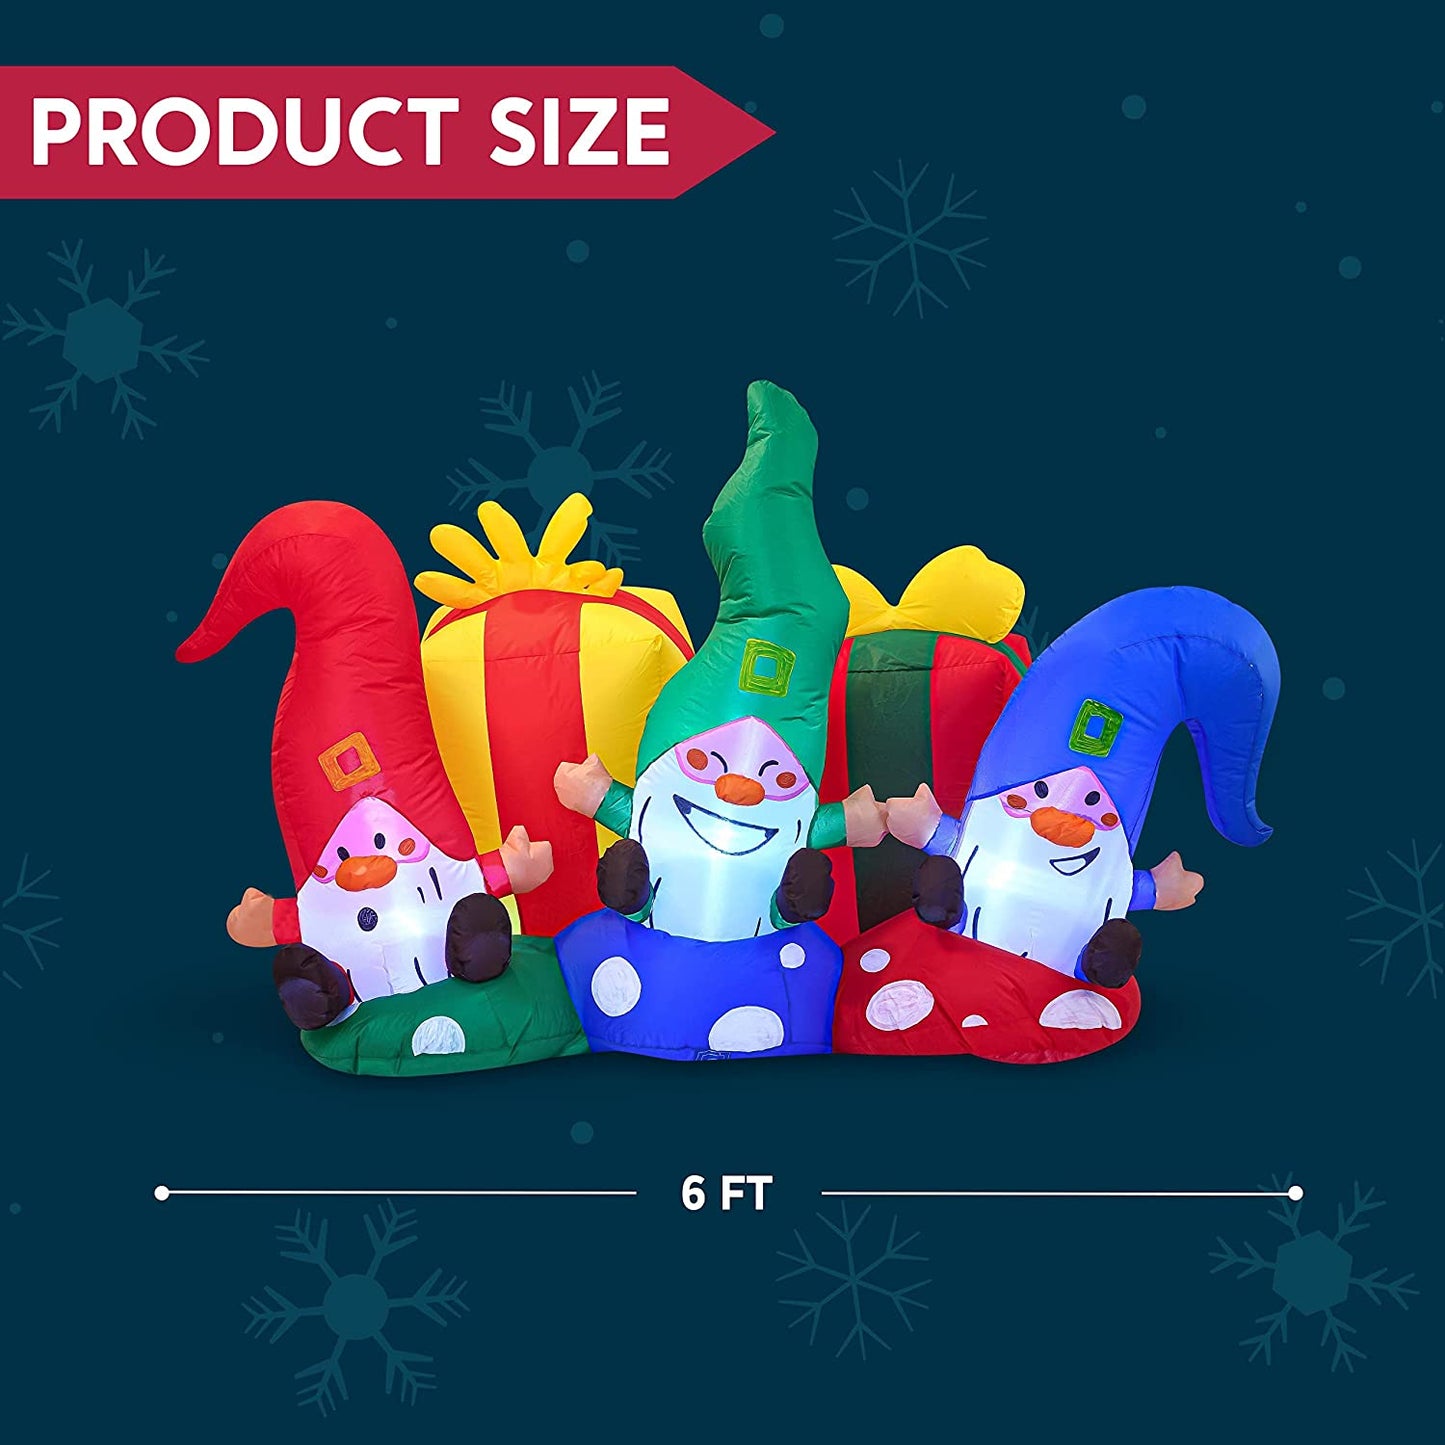 Large Christmas Three Happy Gnomes Inflatable (6 ft)